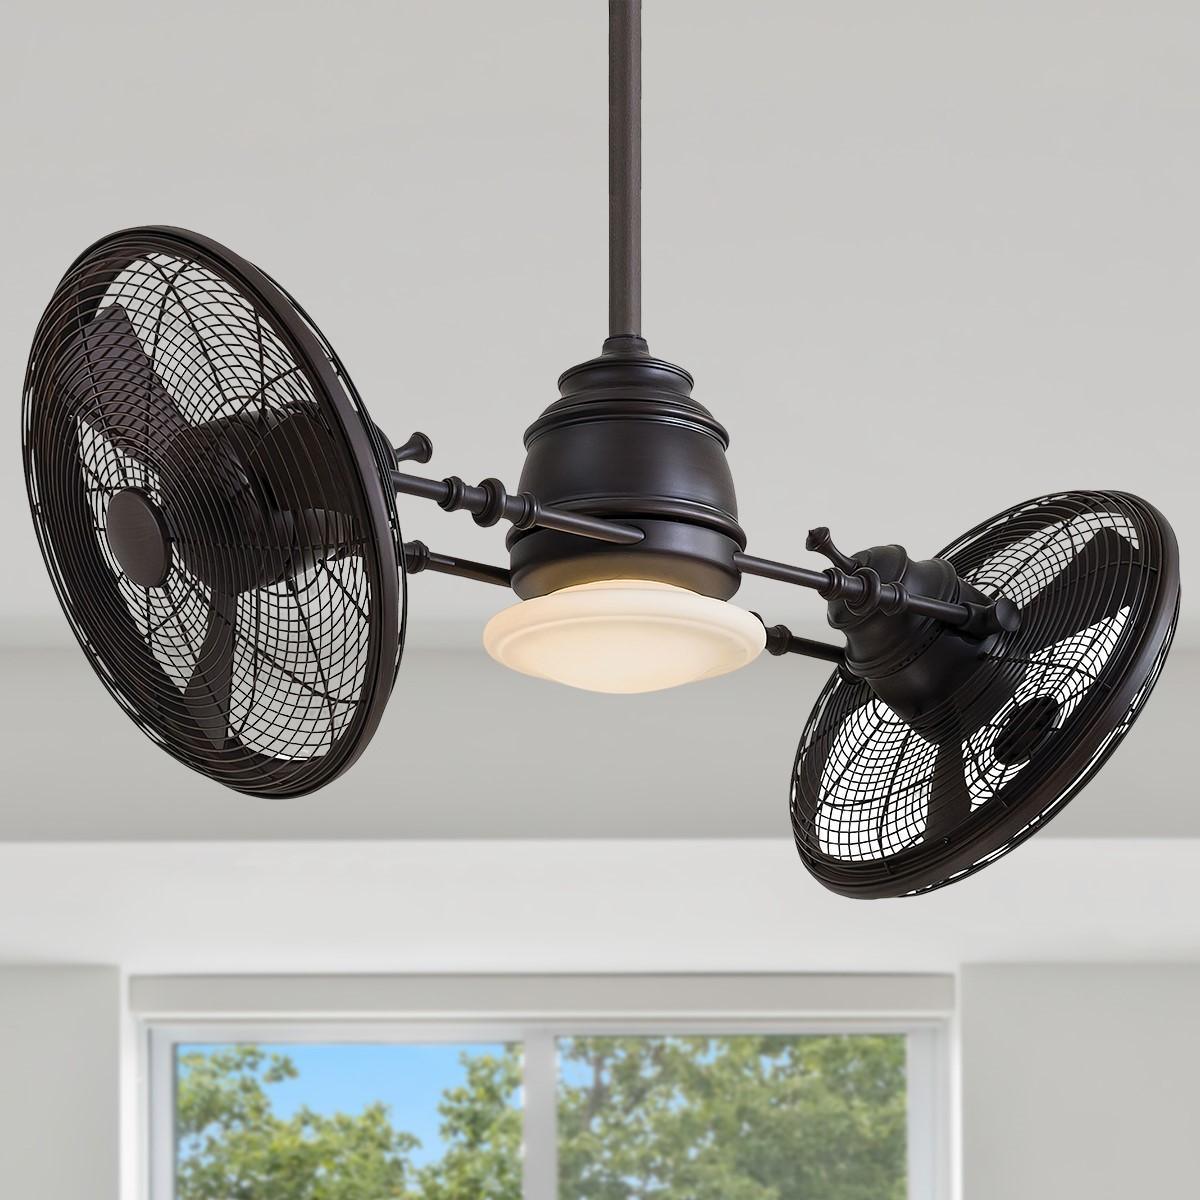 Vintage Gyro 42 Inch Dual Ceiling Fan With Light, Wall Control Included - Bees Lighting